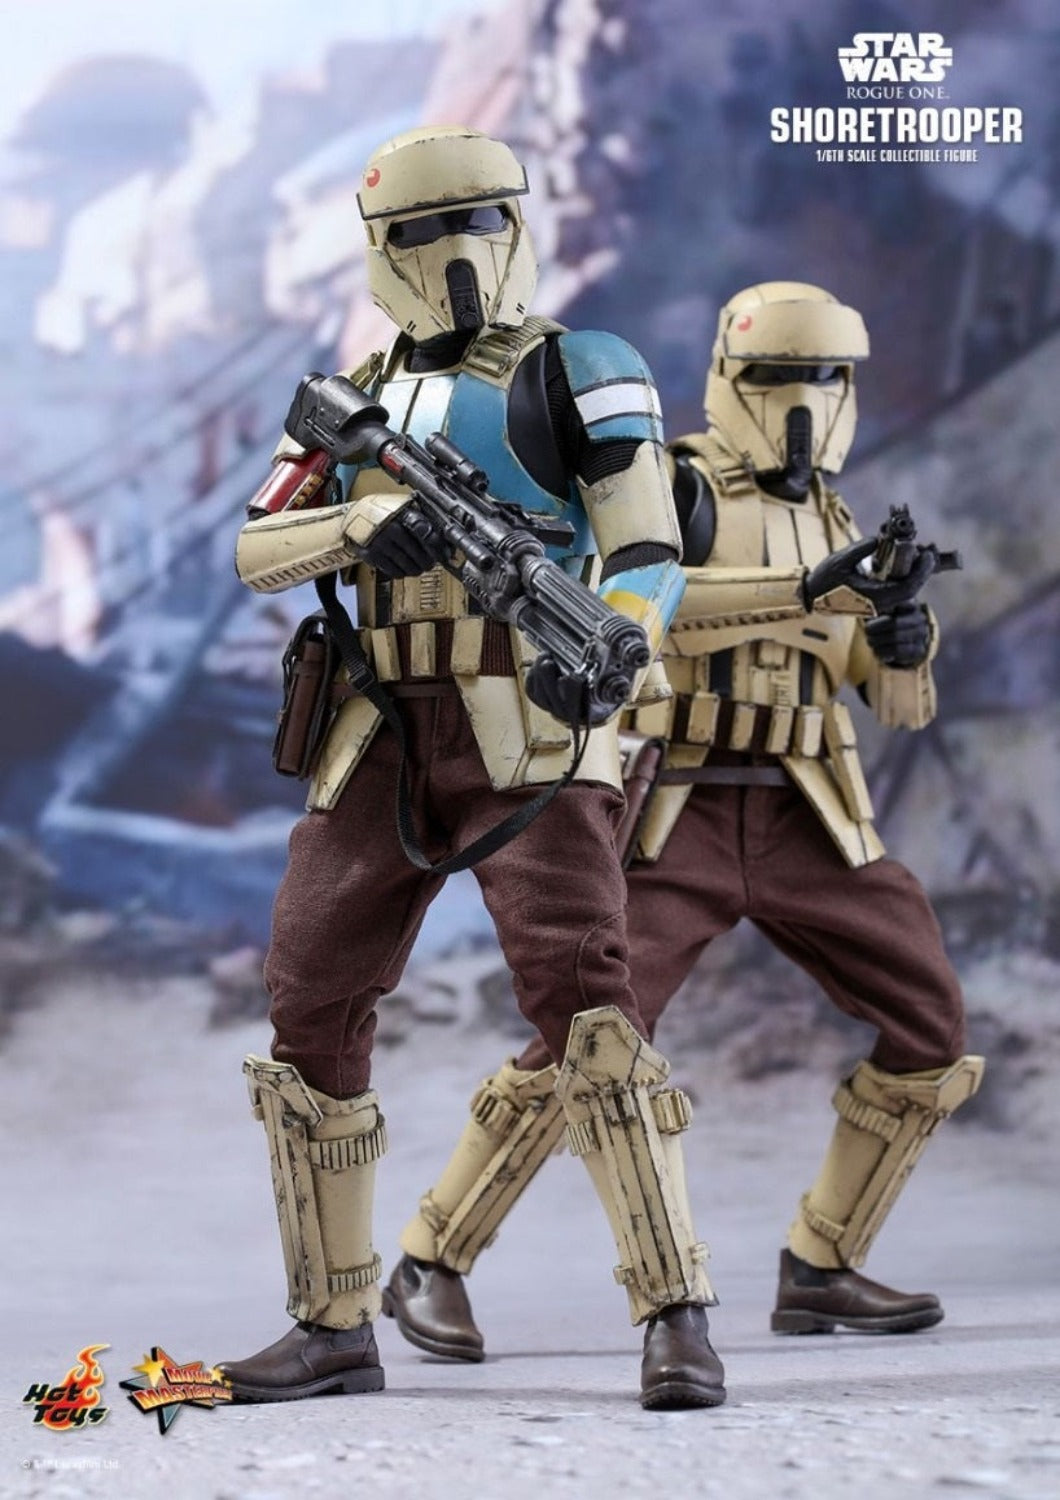 HOT TOYS STAR WARS: ROGUE ONE - SHORETROOPER (EXCLUSIVE) - MMS389 - Anotoys Collectibles